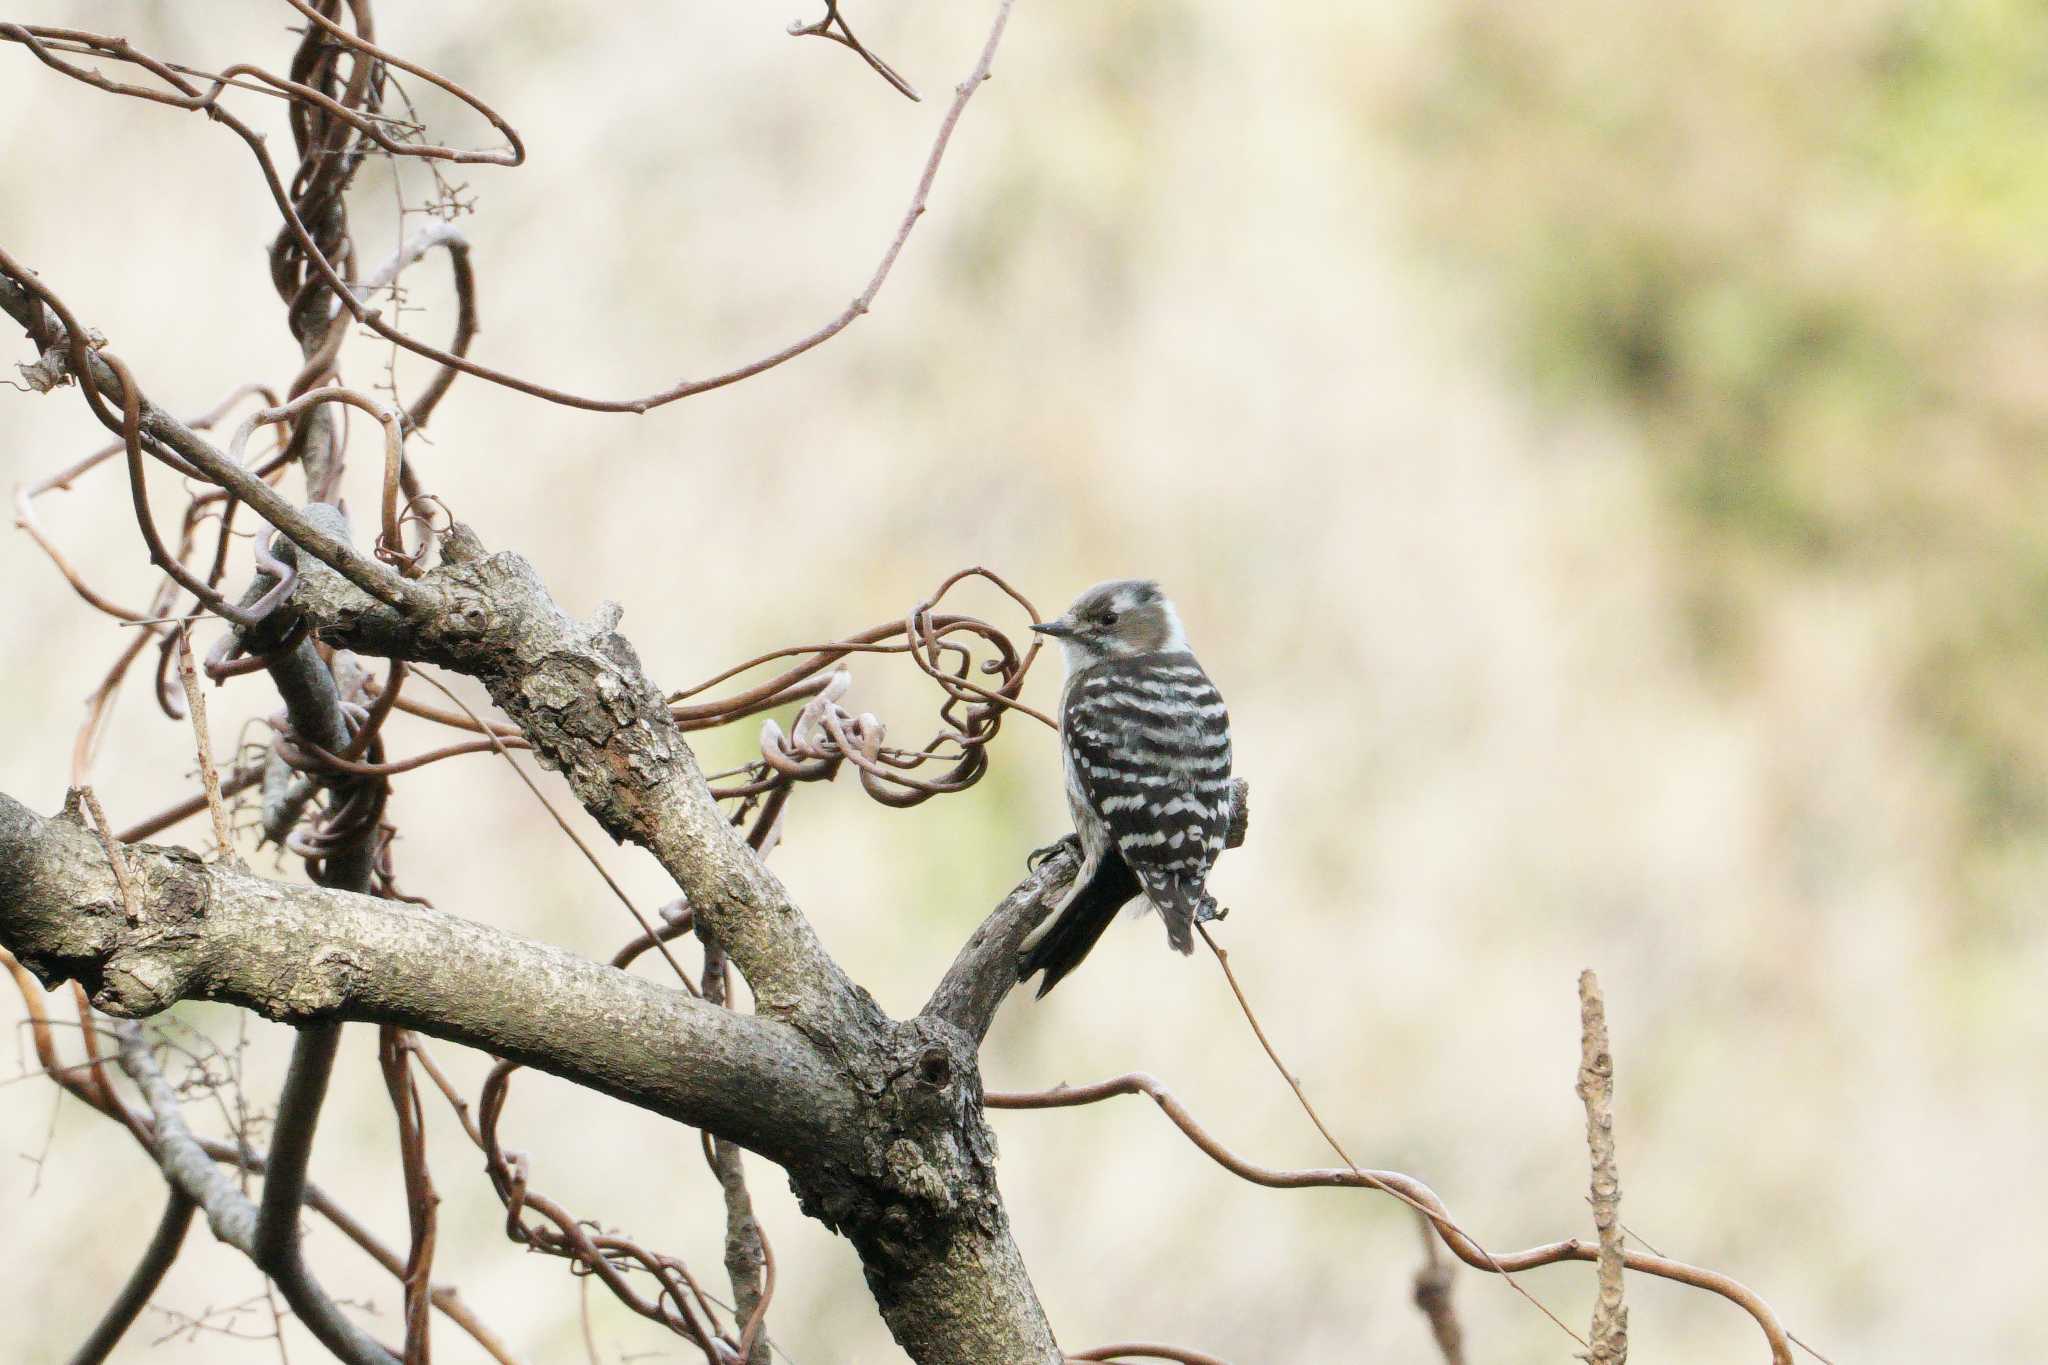 Photo of Japanese Pygmy Woodpecker at 横浜自然観察の森 by sinbesax